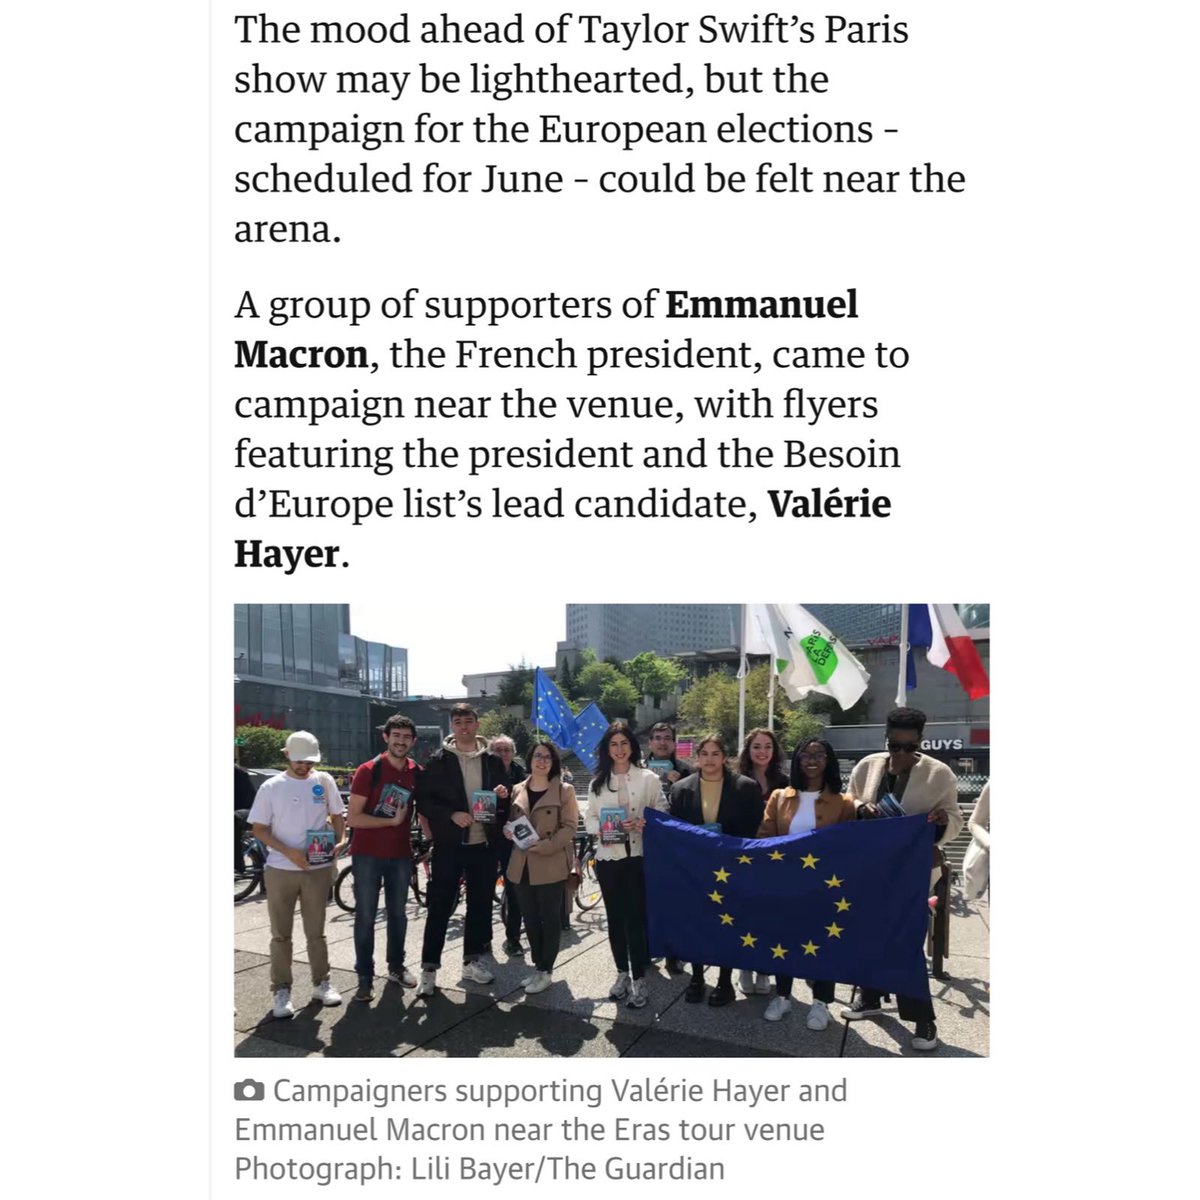 🗞️ « A group of supporters of @EmmanuelMacron, the French president, came to campaign near the venue, with flyers featuring the president and the @BesoindEurope list’s lead candidate, @ValerieHayer. », @guardian. Tracter, partout, tout le temps ! 🇫🇷🇪🇺 #TaylorSwiftErasTourParis